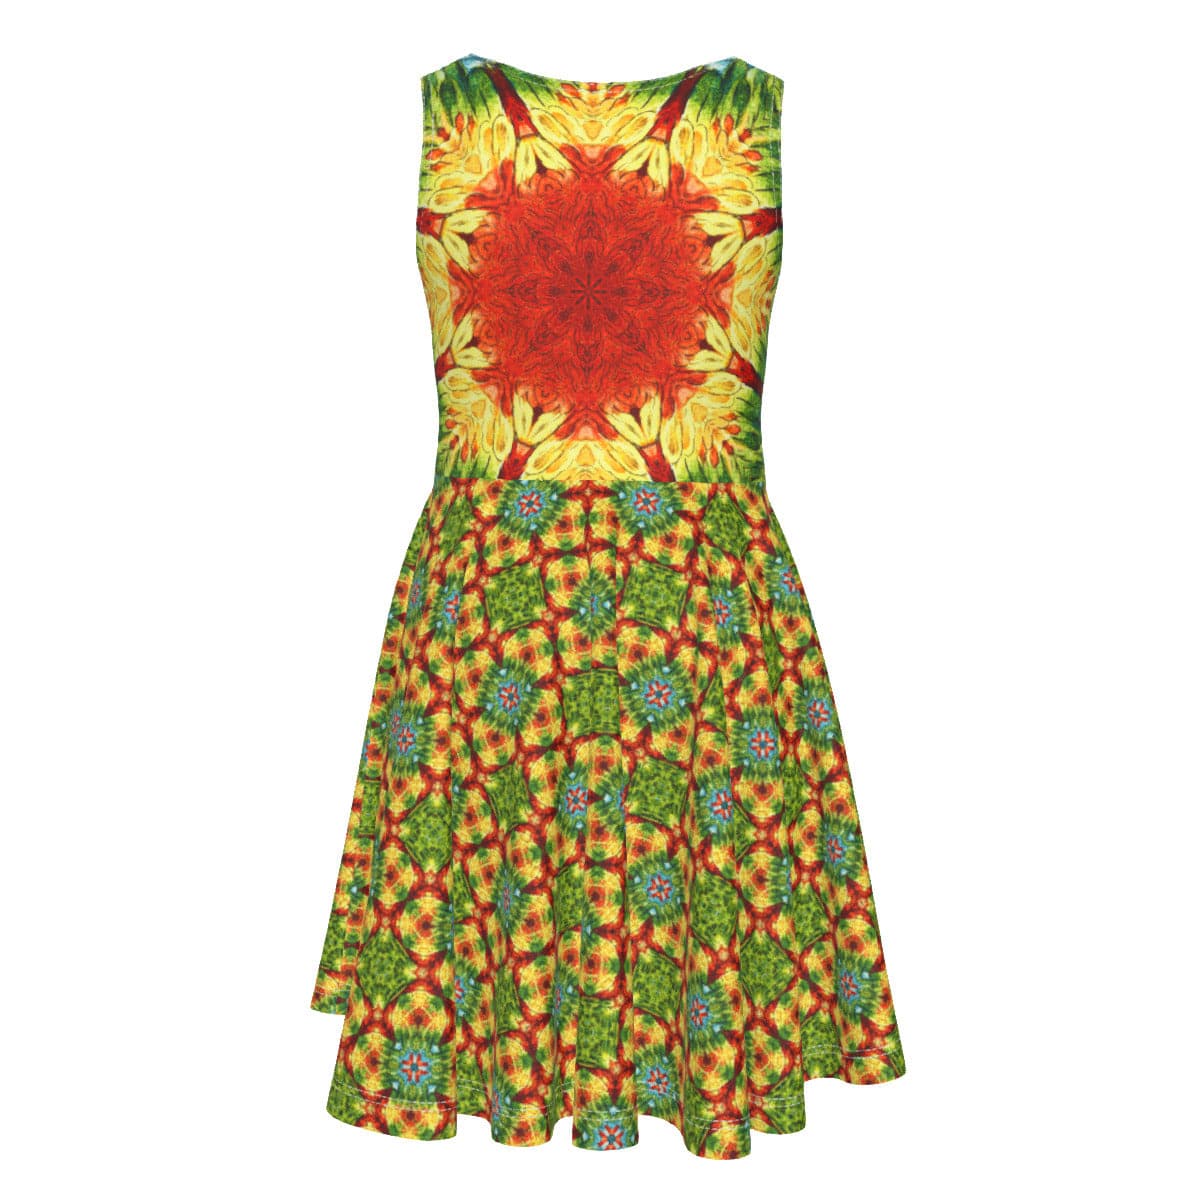 Sun in your Heart,  Kid's Sleeveless Colorful Dress, by Sensus Studio Design